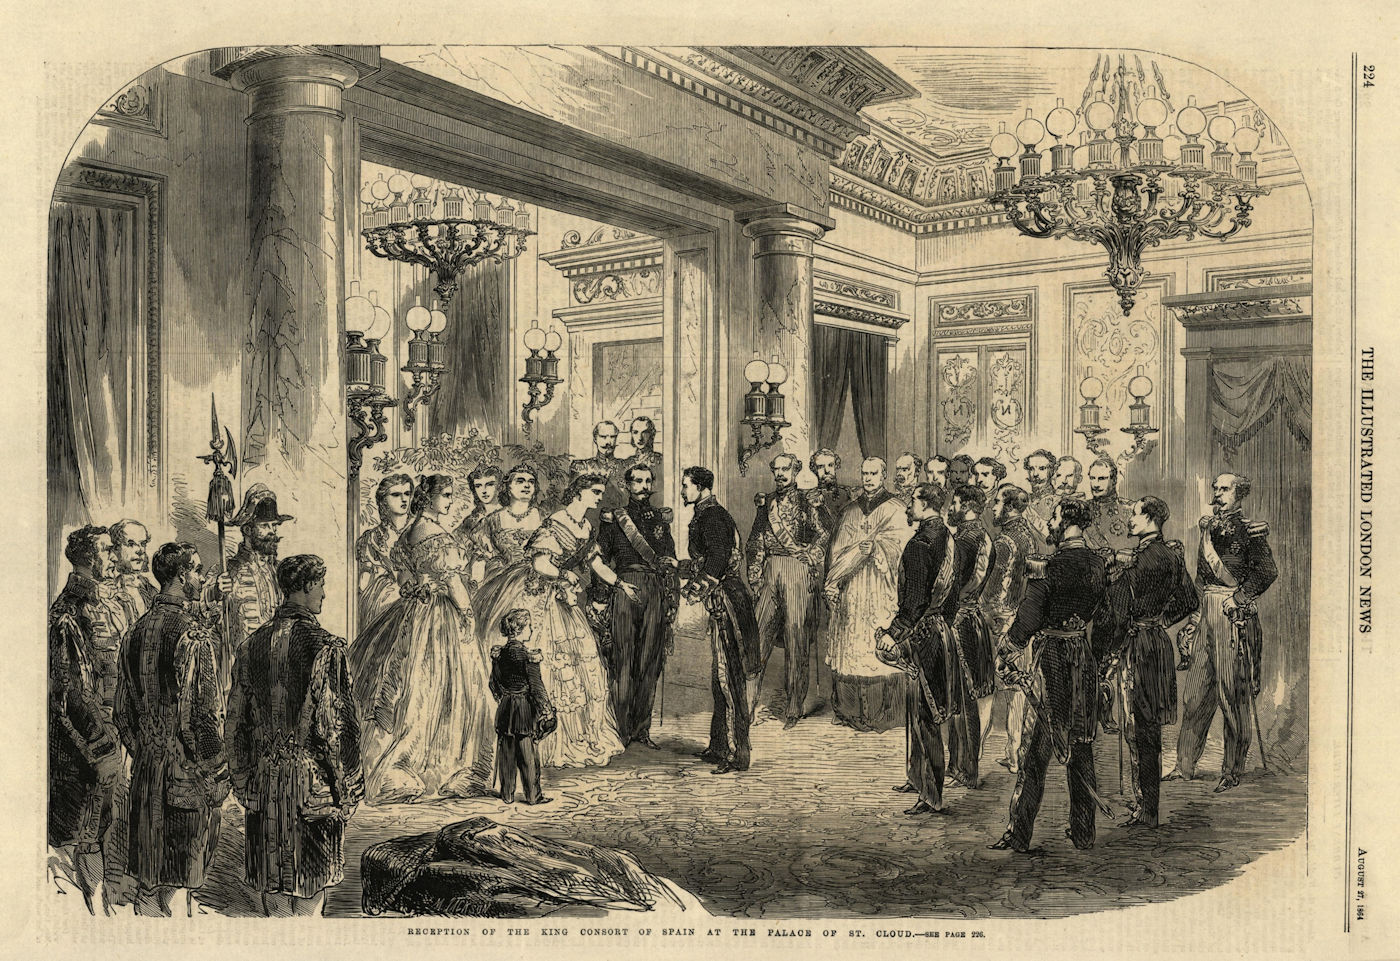 Associate Product Reception of the King Consort of Spain at the Palace of St. Cloud. Paris 1864